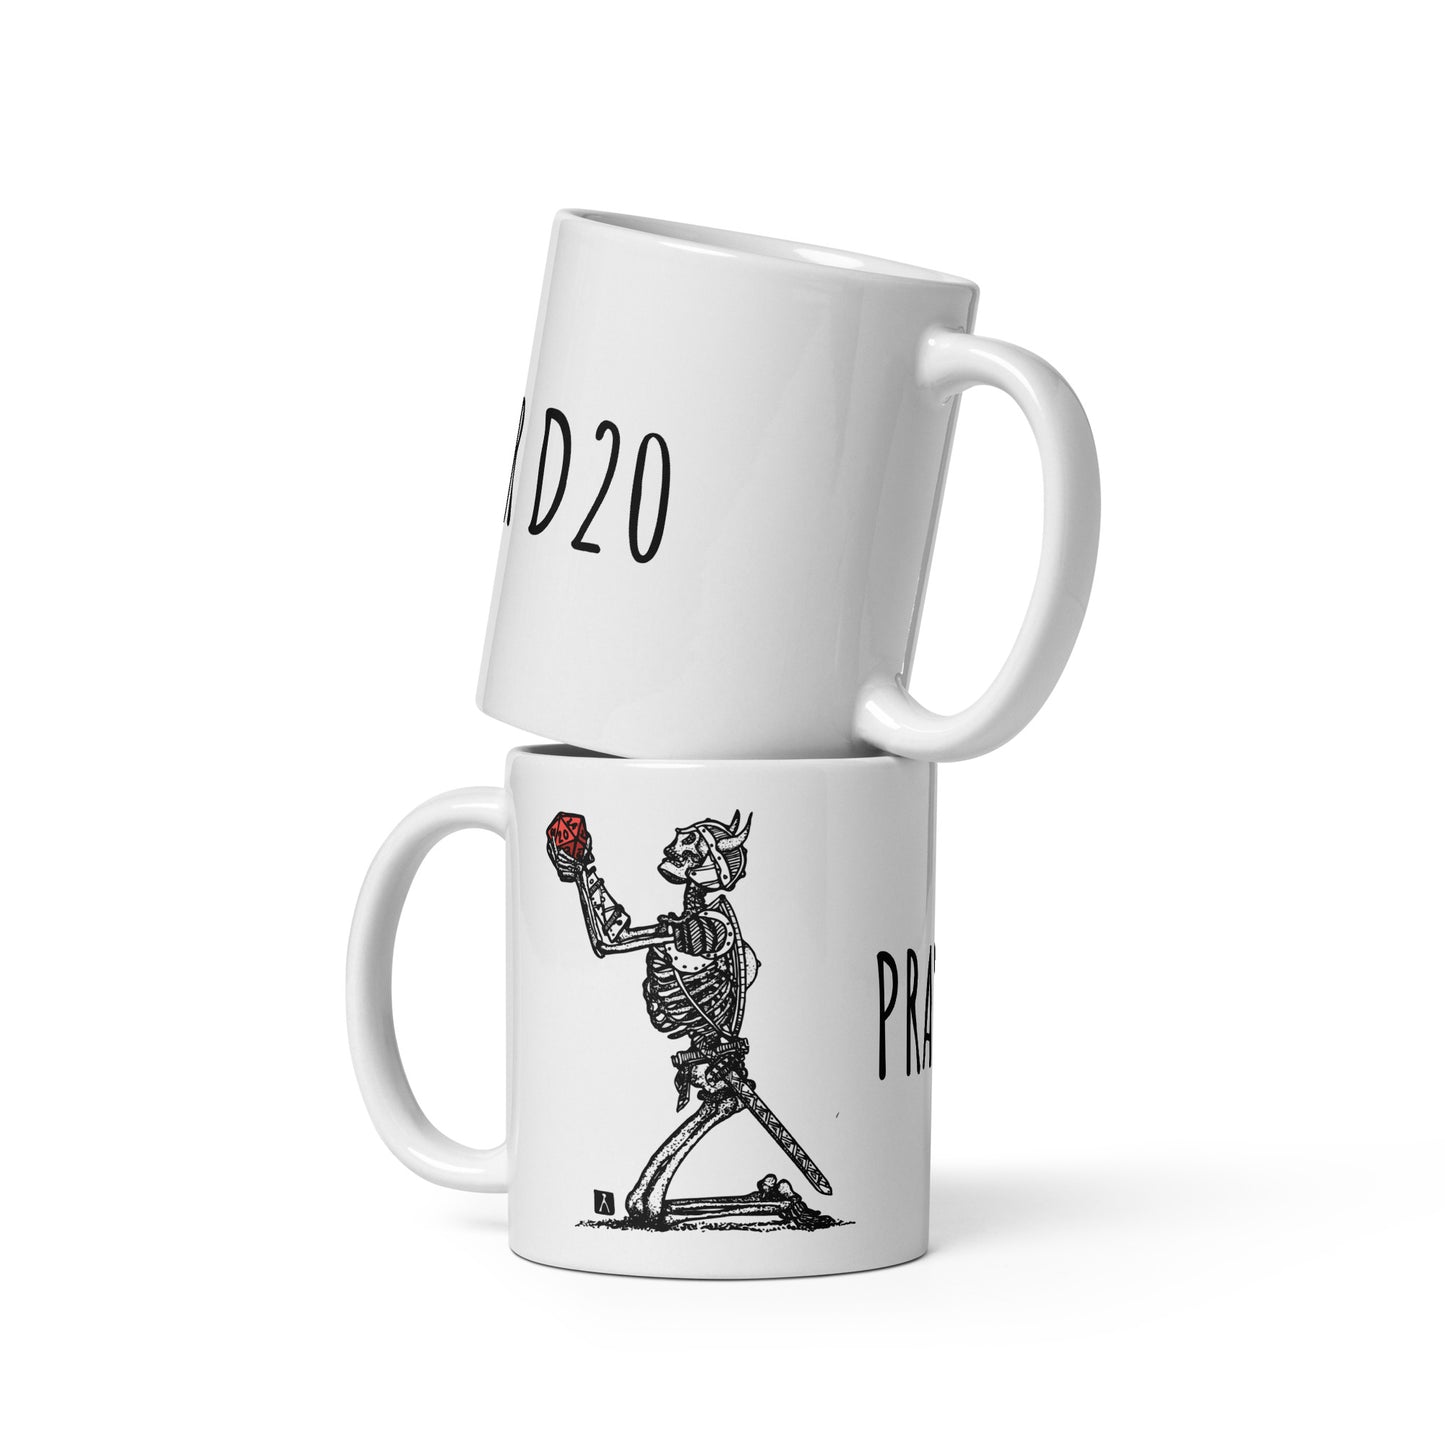 BellavanceInk: Coffee Mug With Pen & Ink Drawing Of A Skeleton Warrior Praying For A D20 Dice Roll